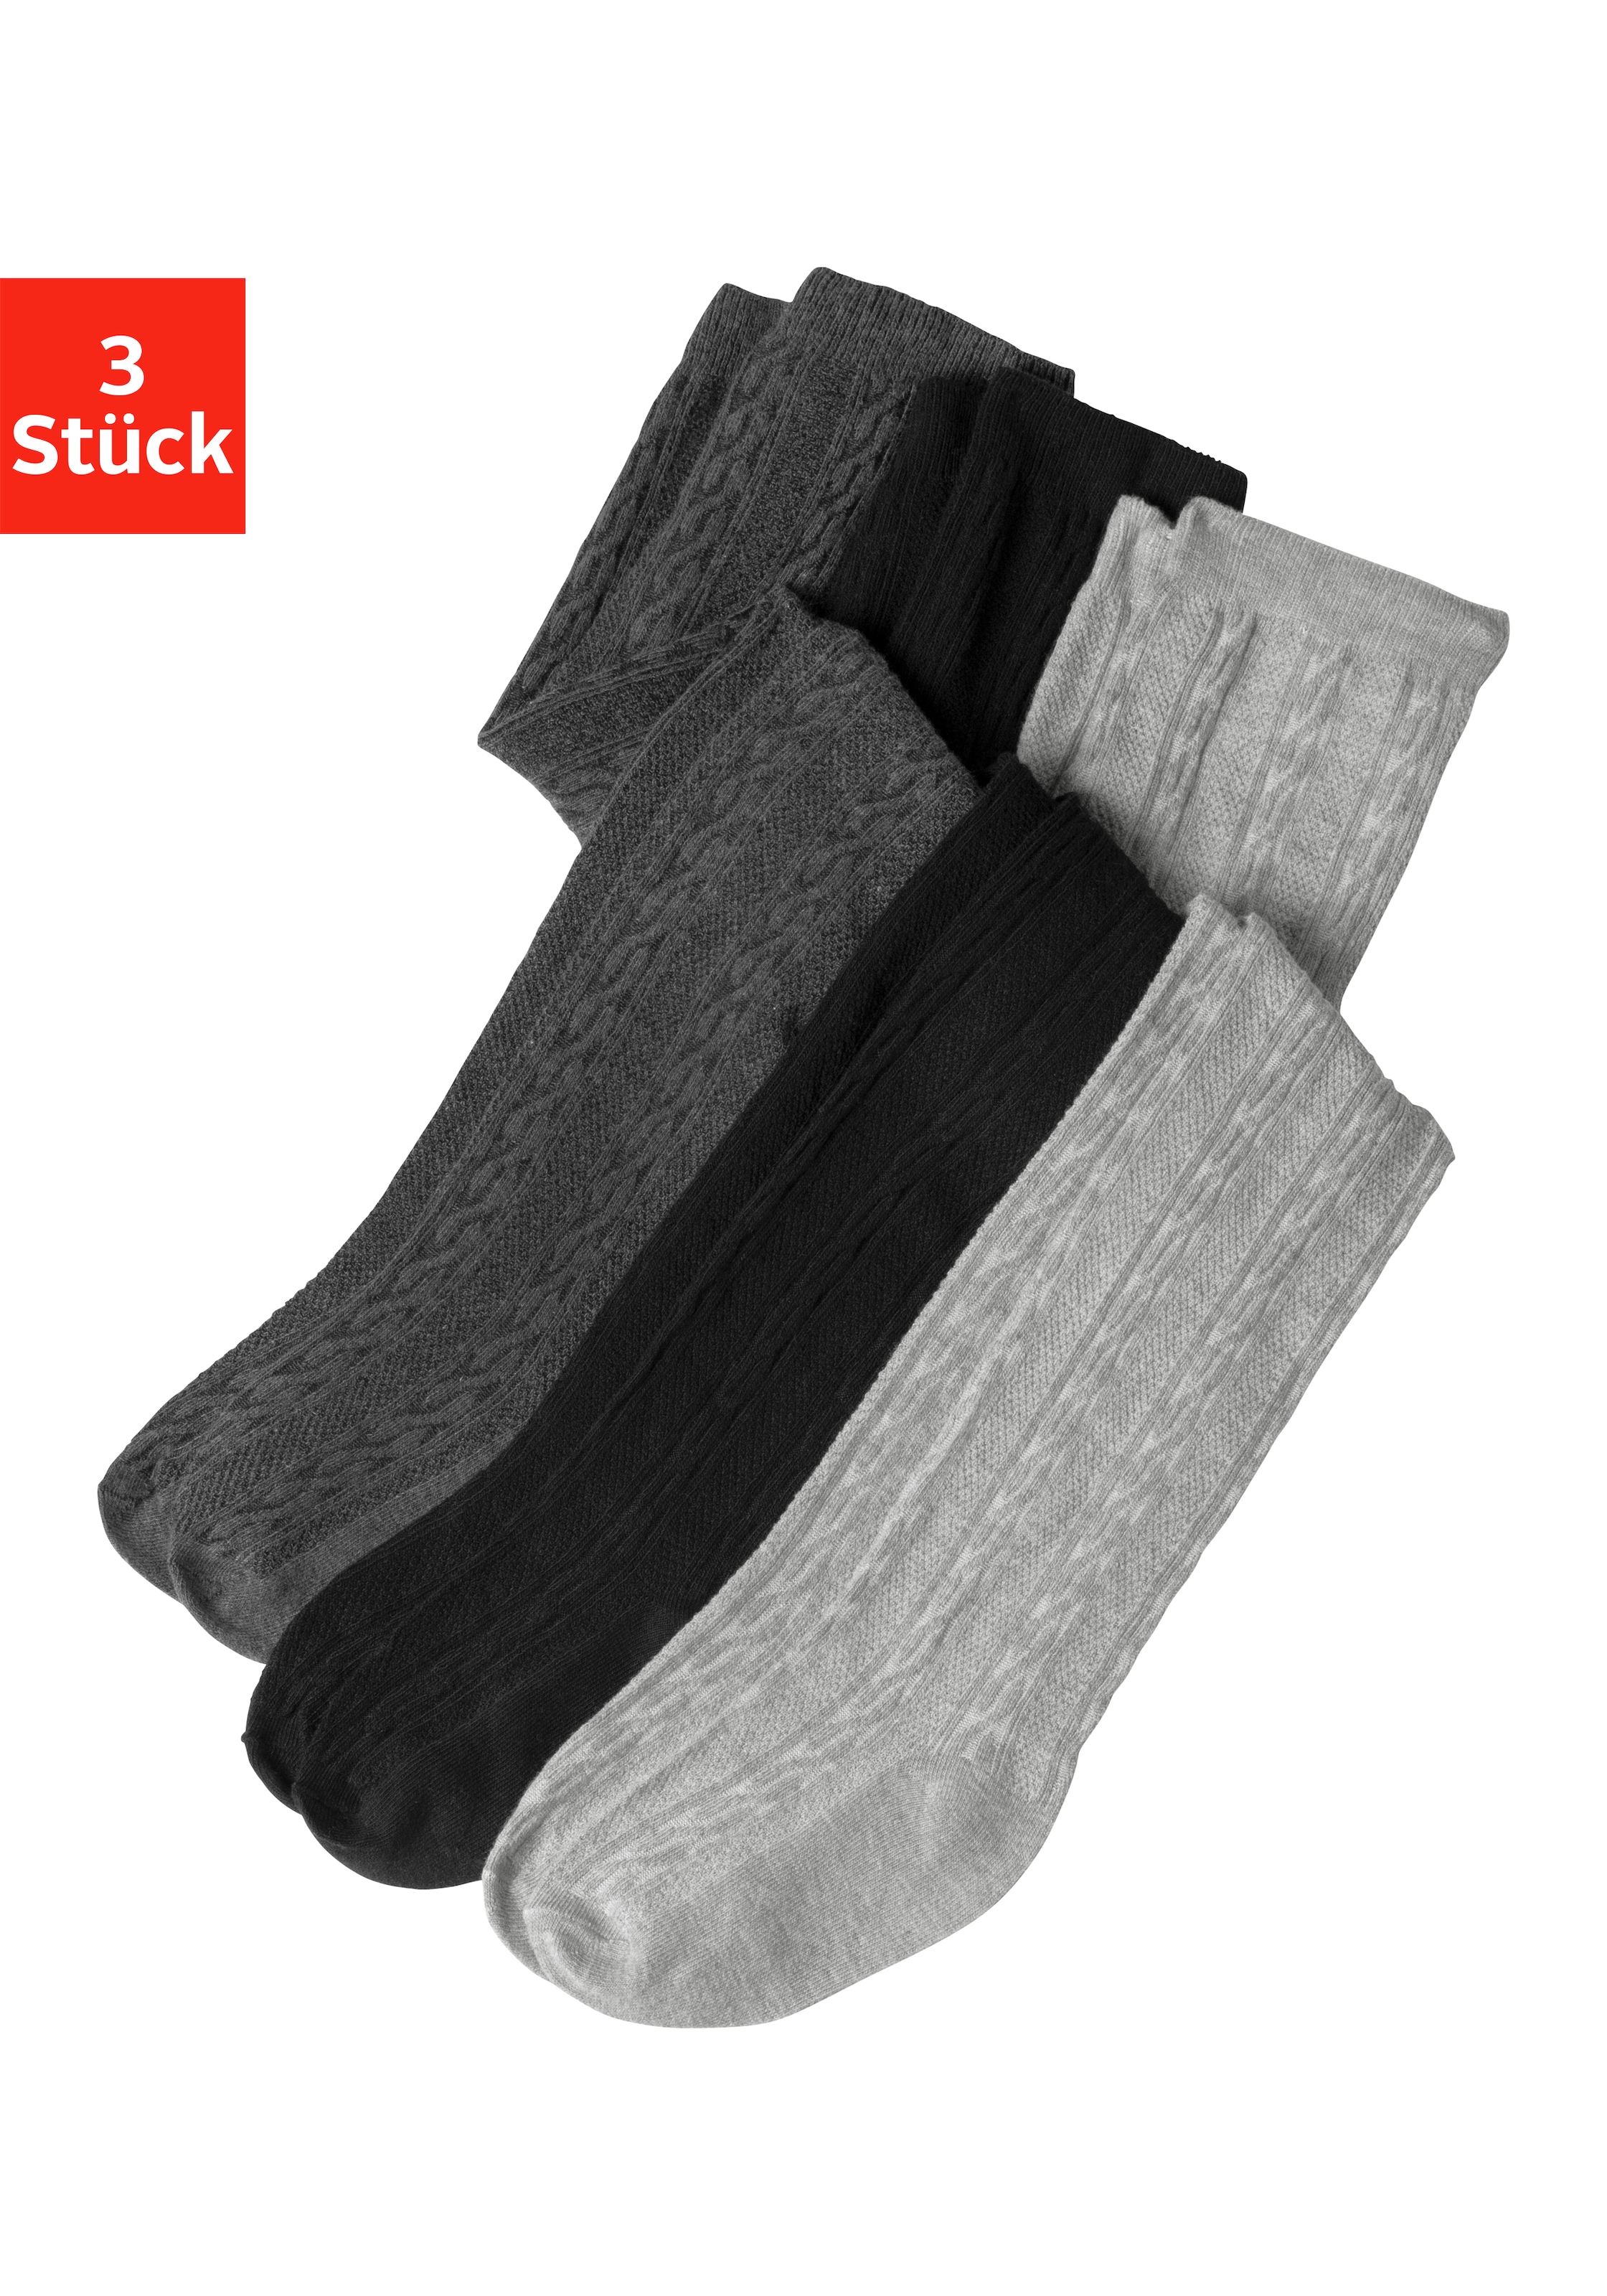 ♕ Zopfmuster (Packung, bei St.), 3 mit H.I.S Strumpfhose,